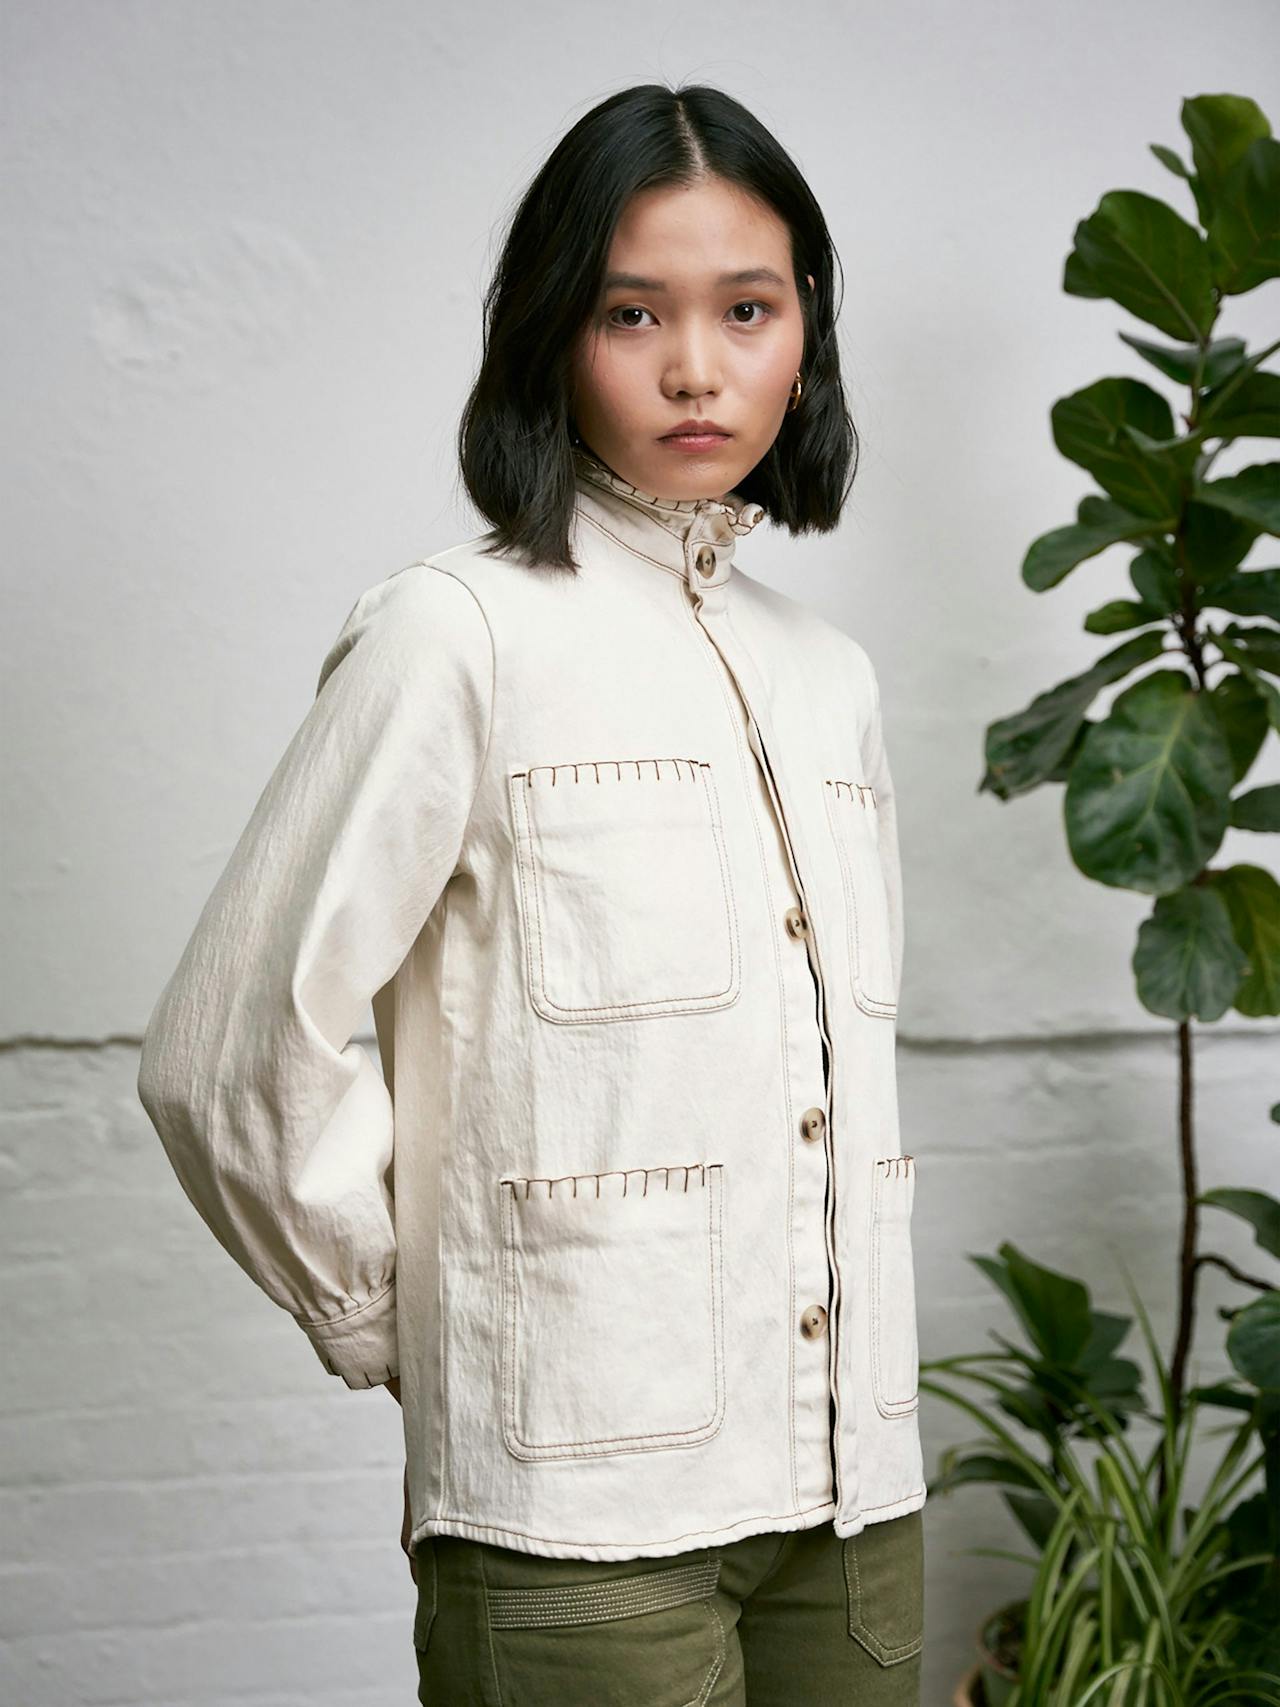 The perfect trans-seasonal Seventy + Mochi shacket in white ecru denim. Loose fitting body with balloon sleeve shaping and hand-done blanket stitching. Collagerie.com